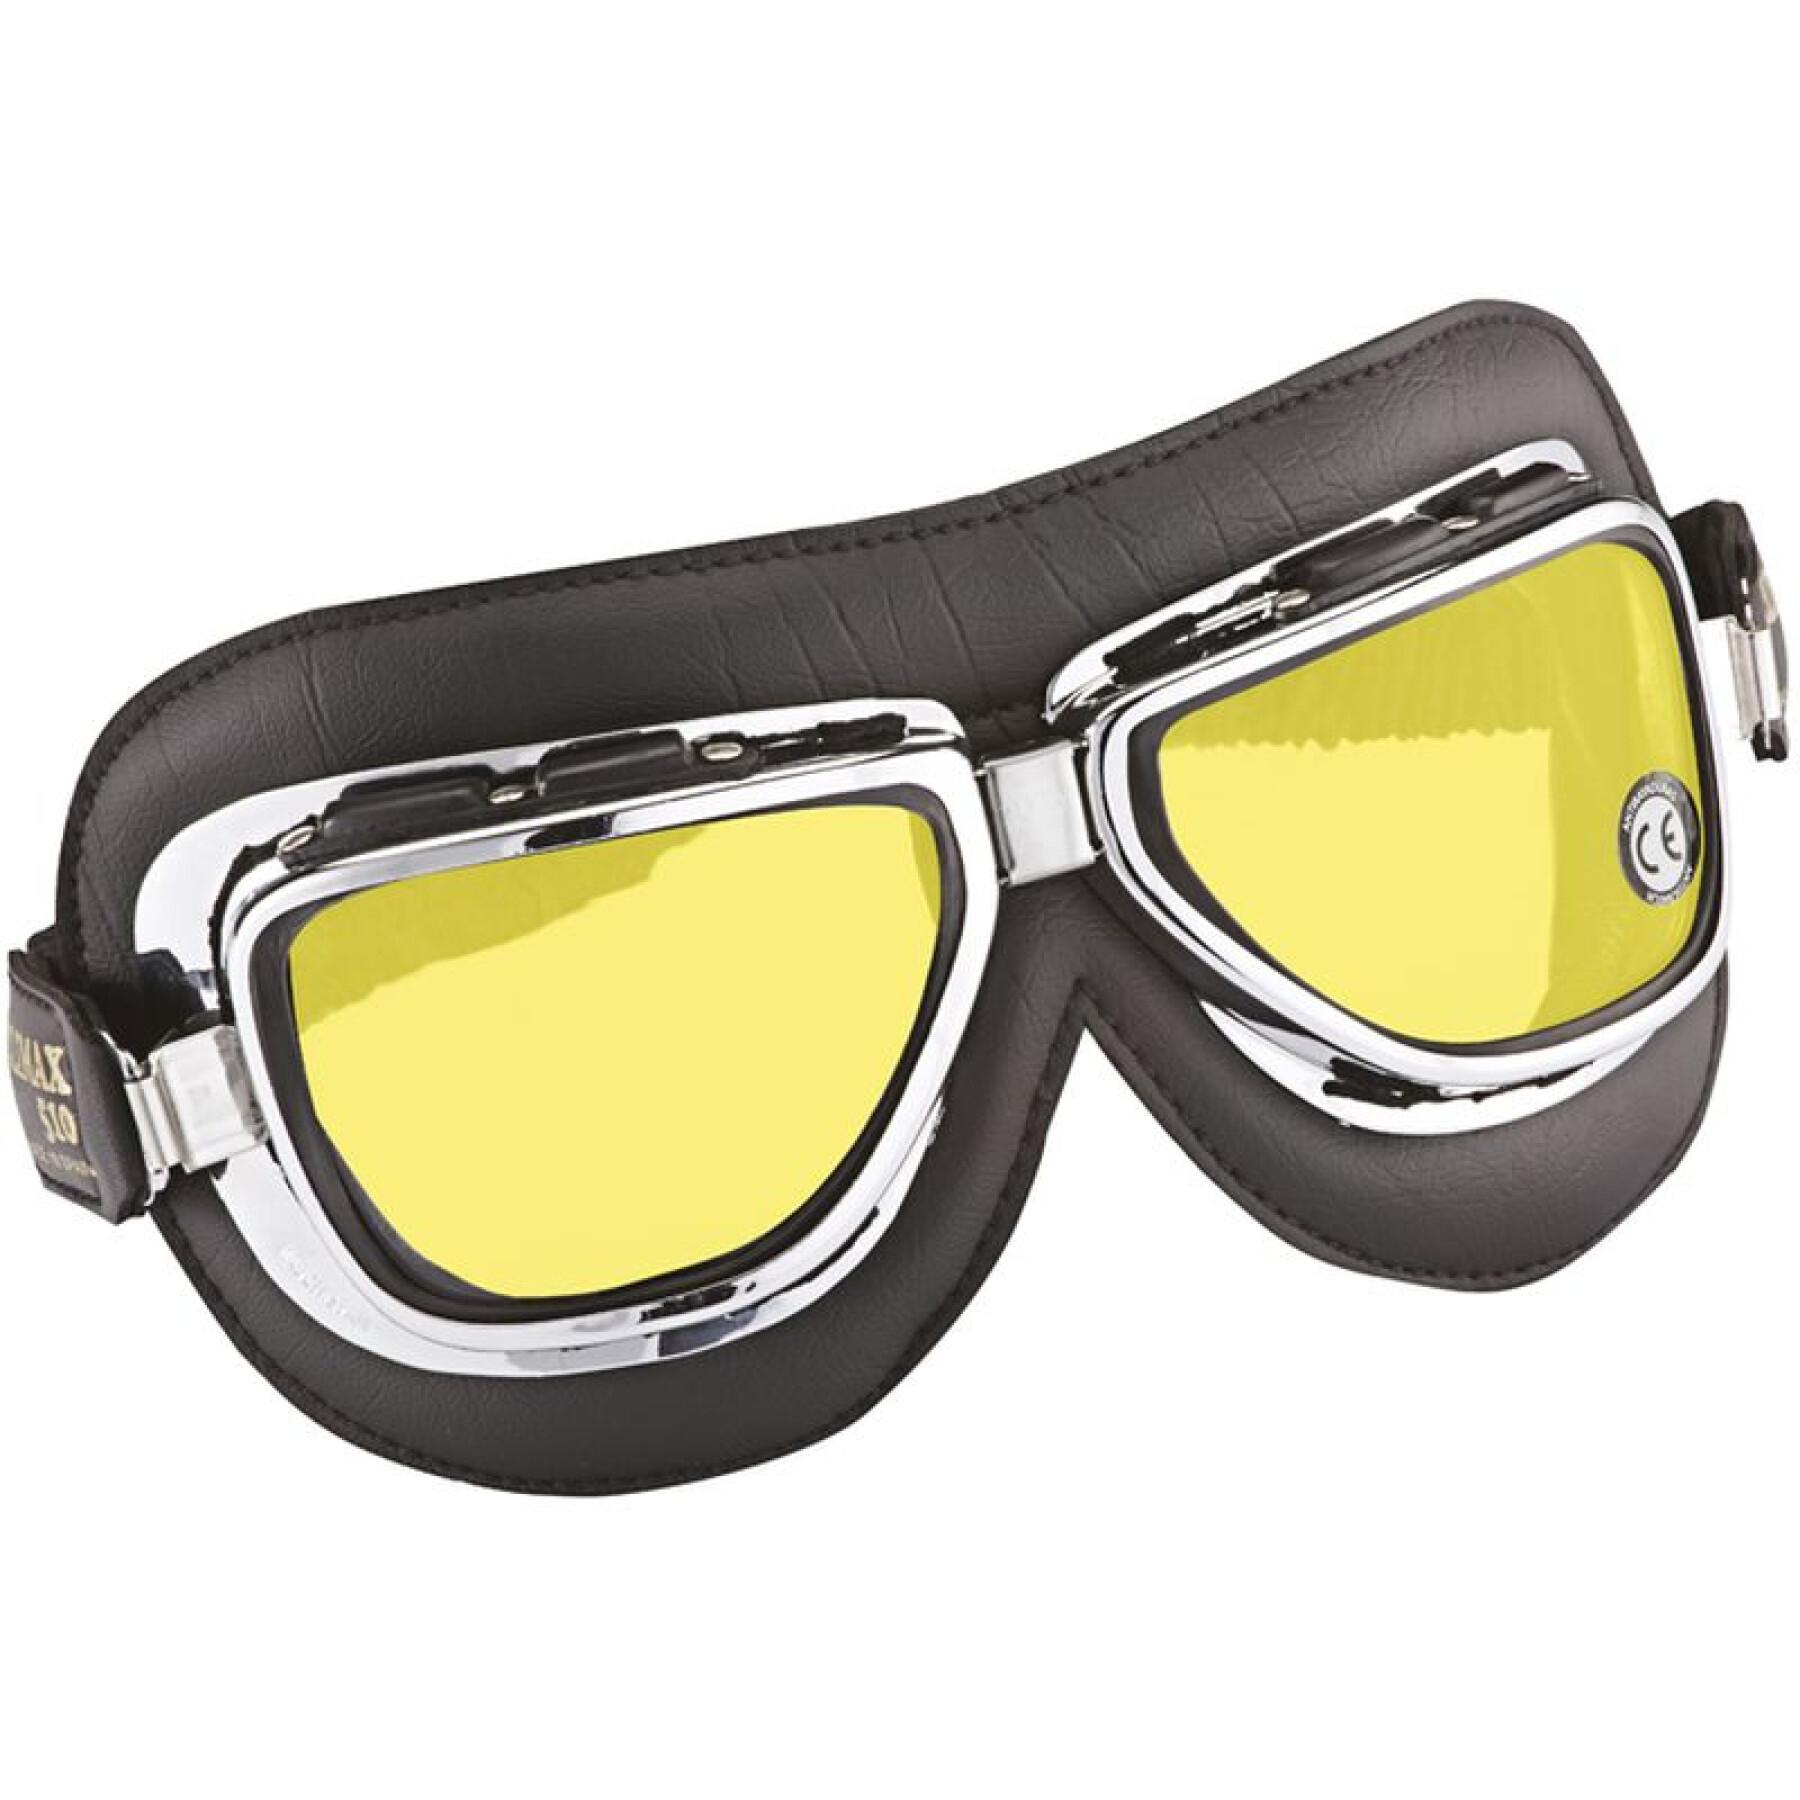 Motorcycle goggles Climax 510 – LU 14